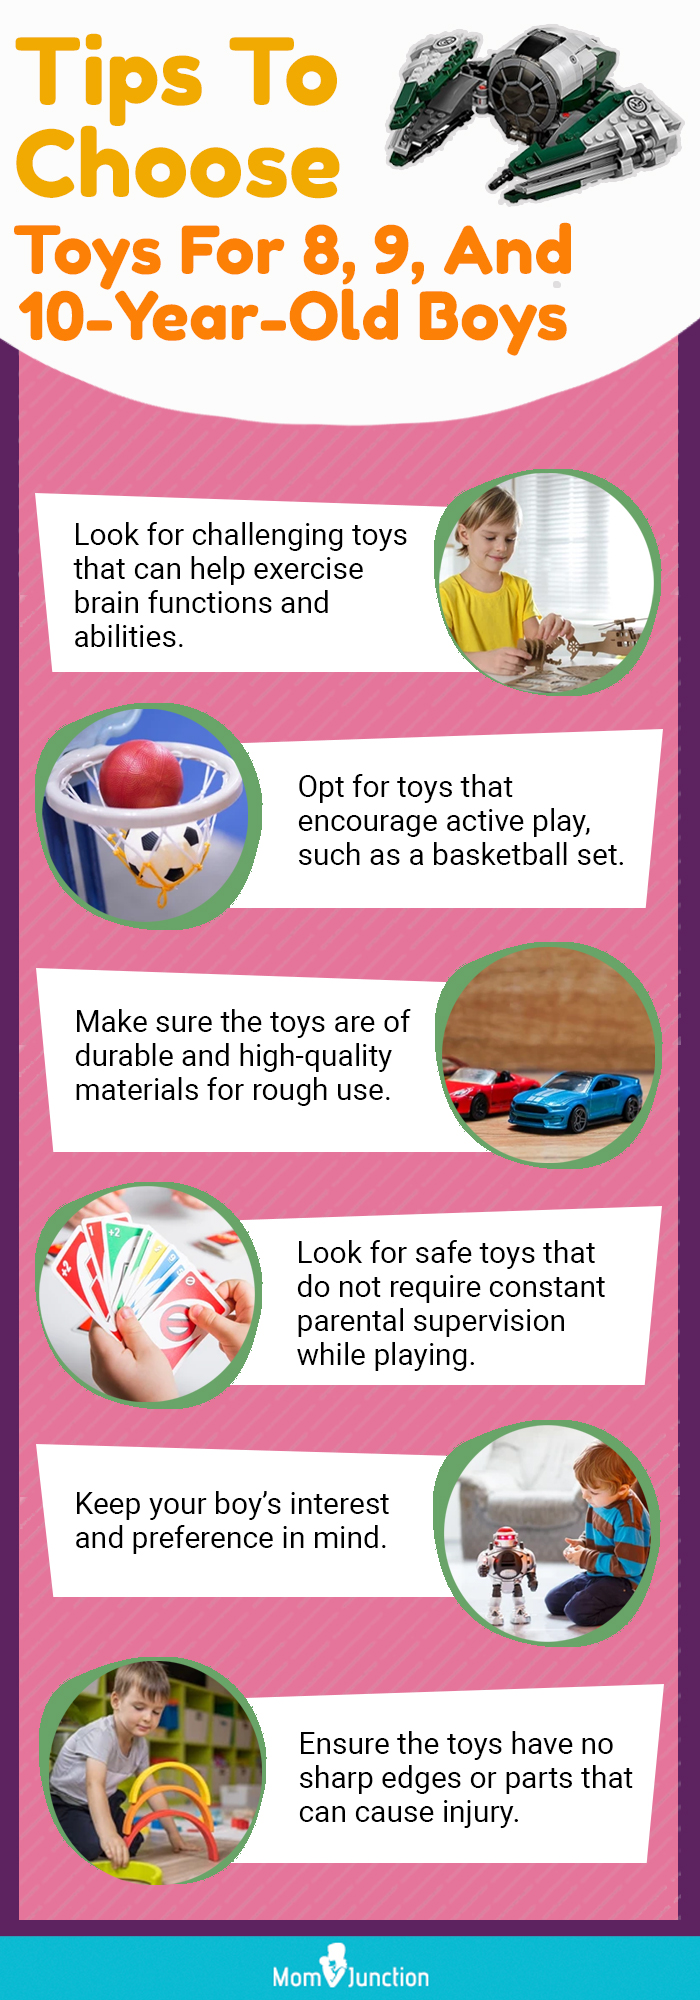 Advice On Choosing Toys For 8, 9, And 10-Year-Old Boys (infographic)